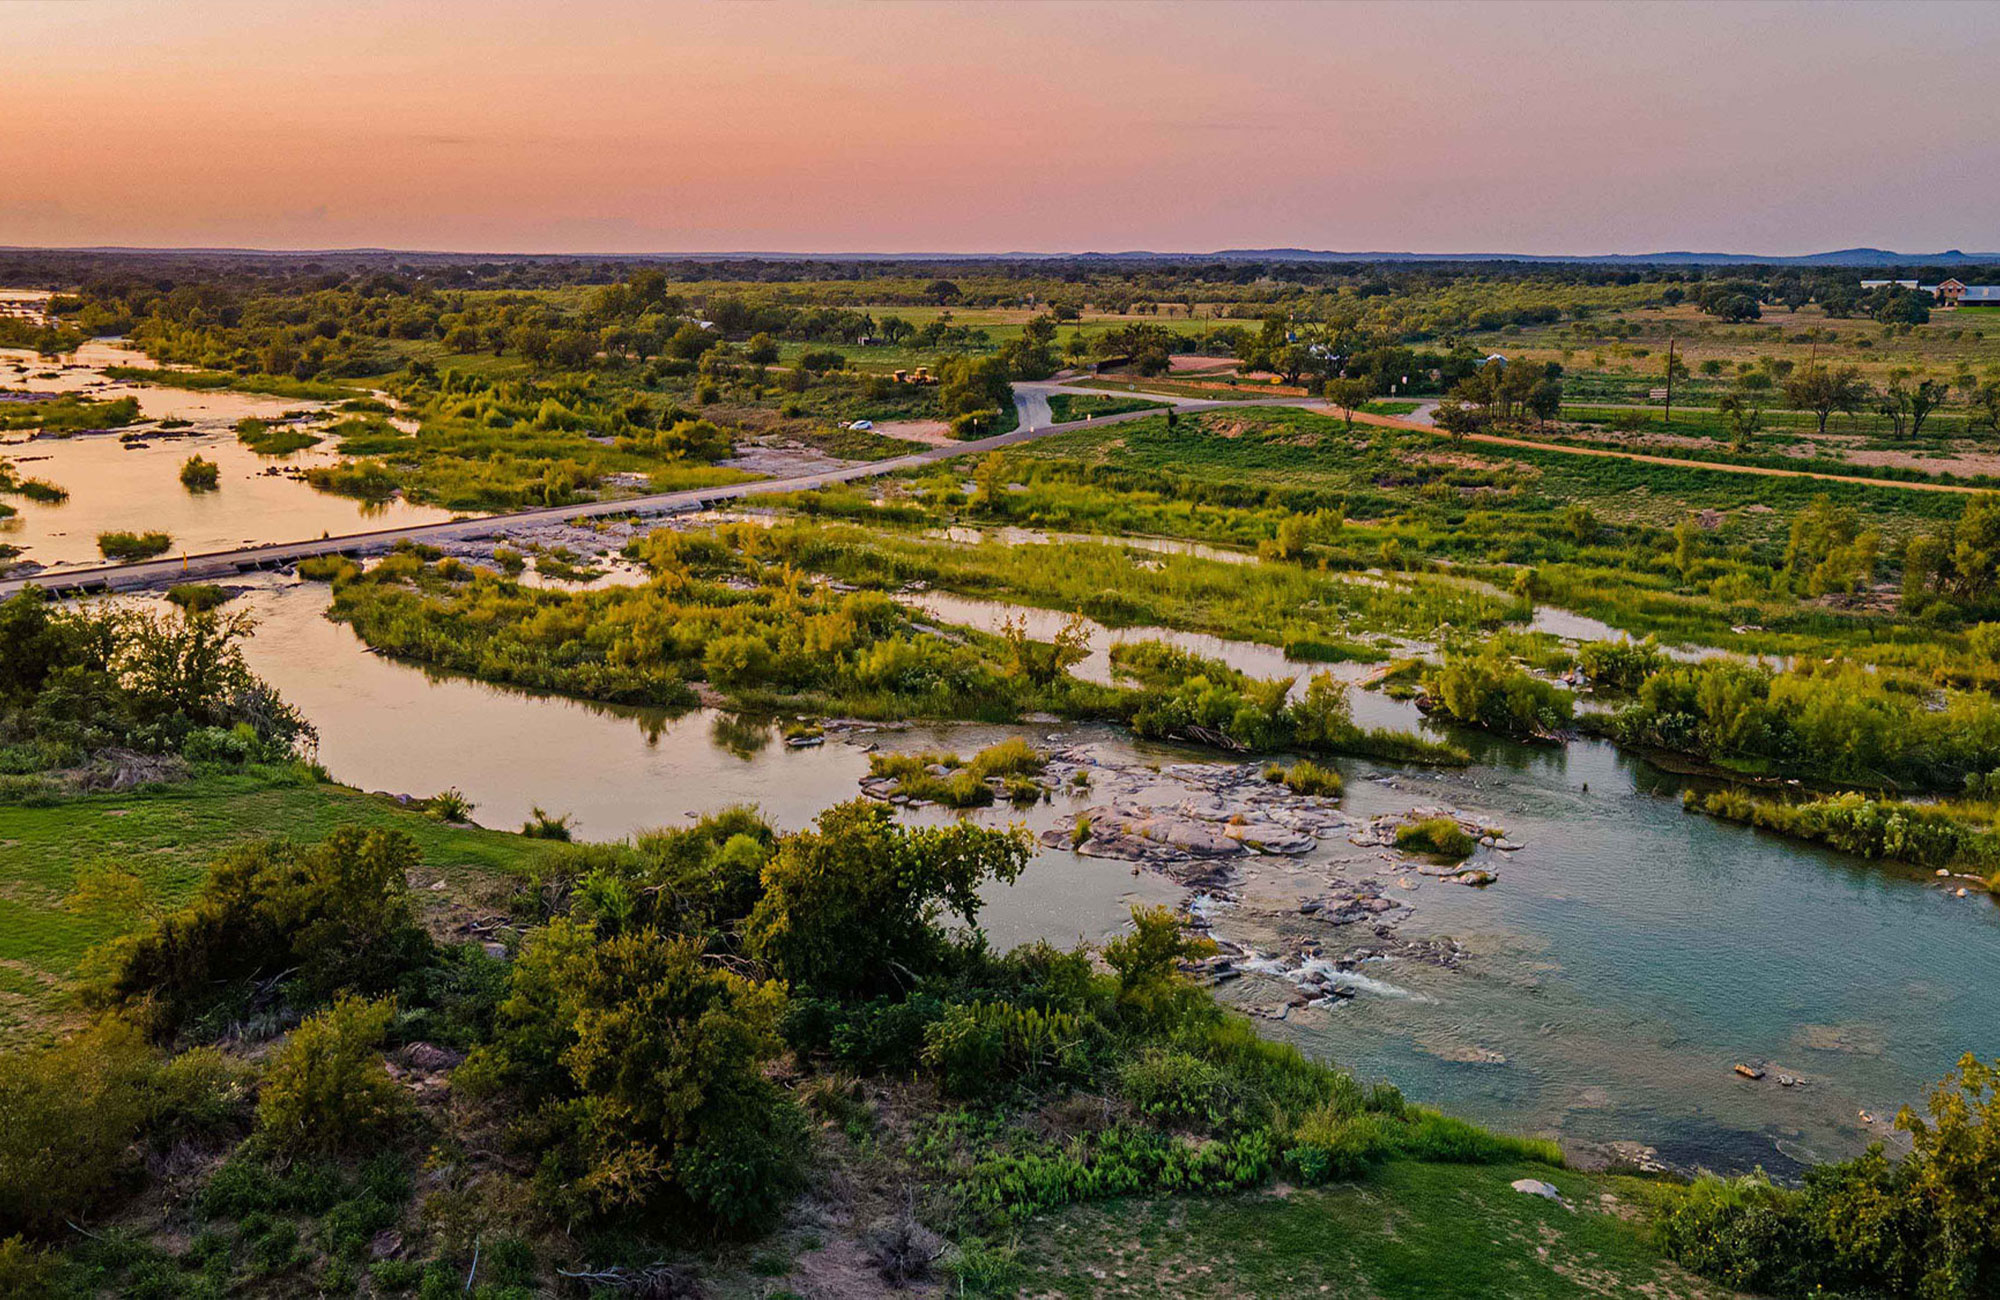 El Castell on the Llano River Aerial View